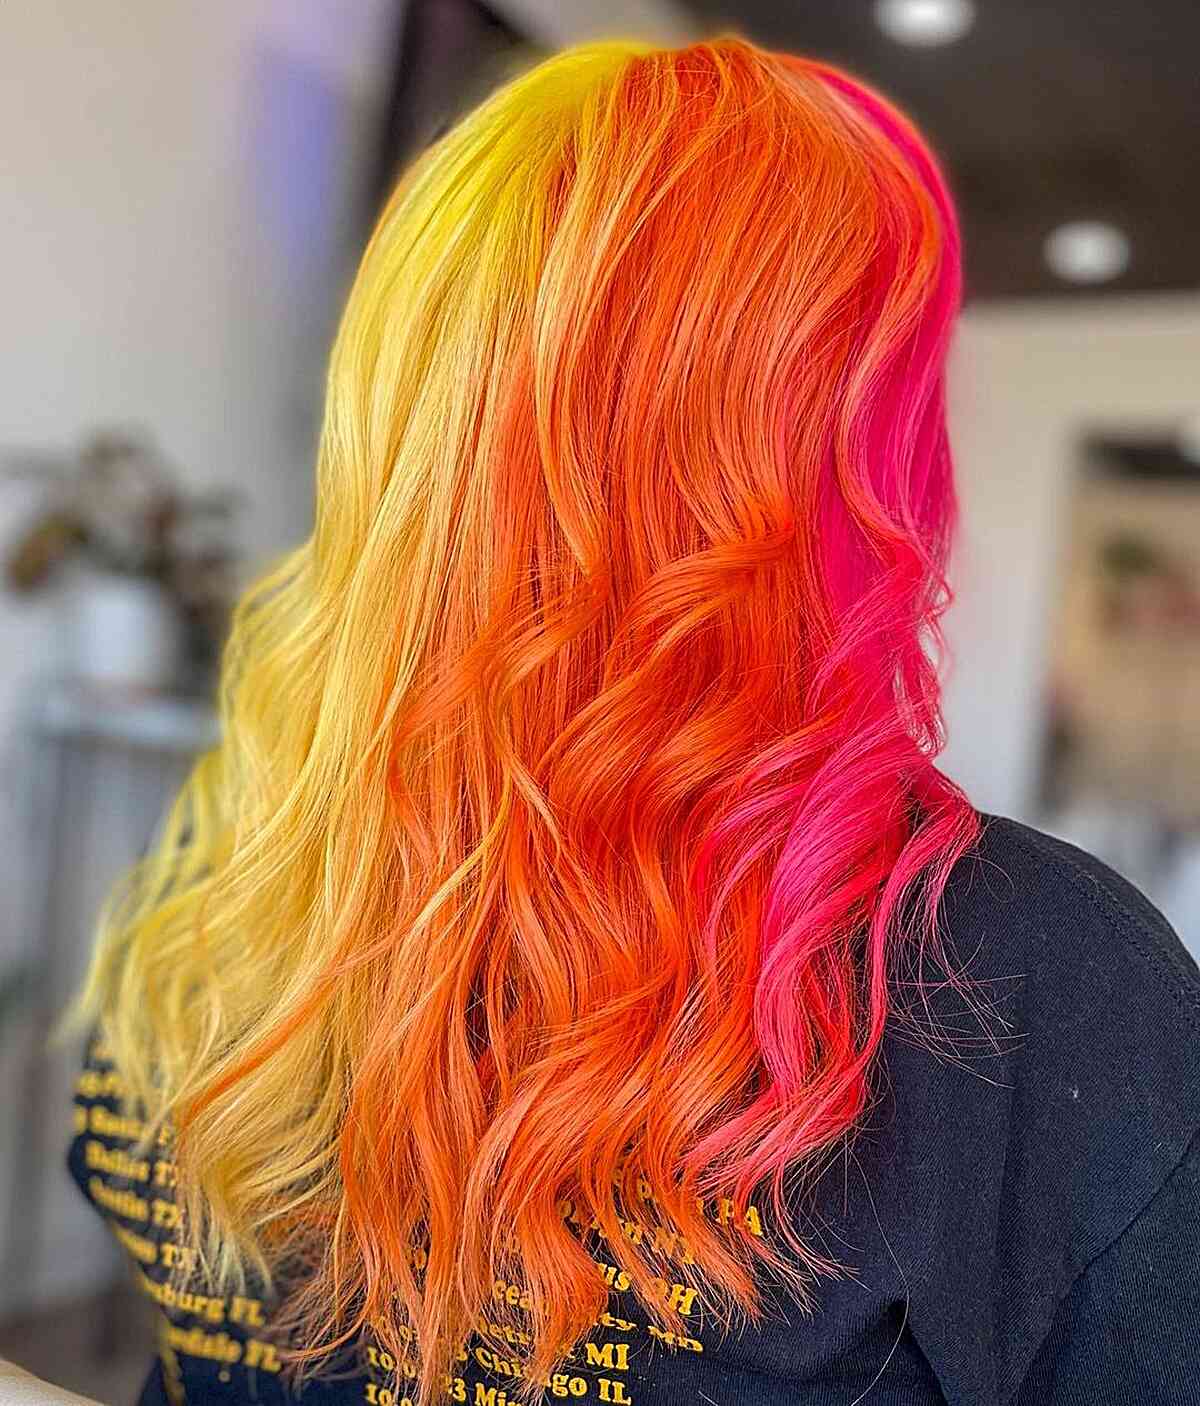 Yellow-Orange-Pink Sunset Split Dye Hair Color with Waves